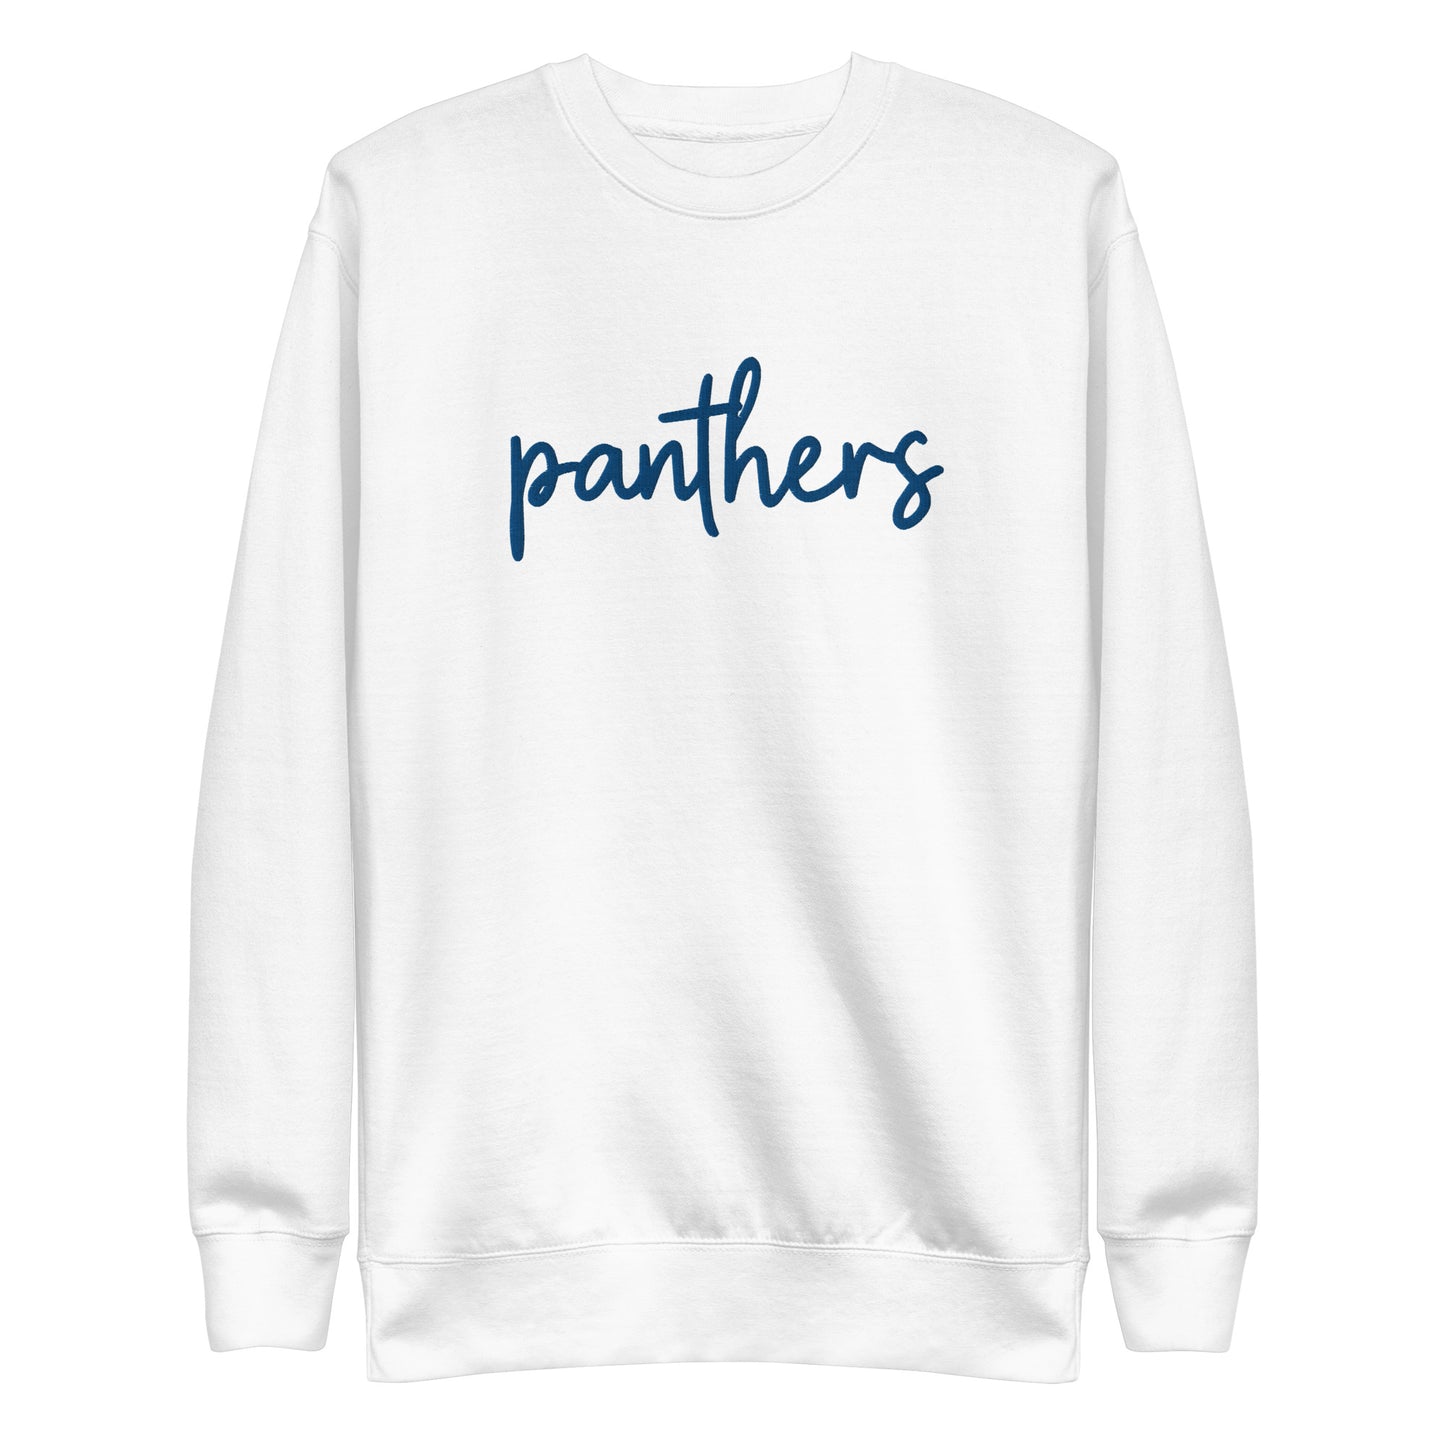 Panthers Script Embroidered Crew Neck